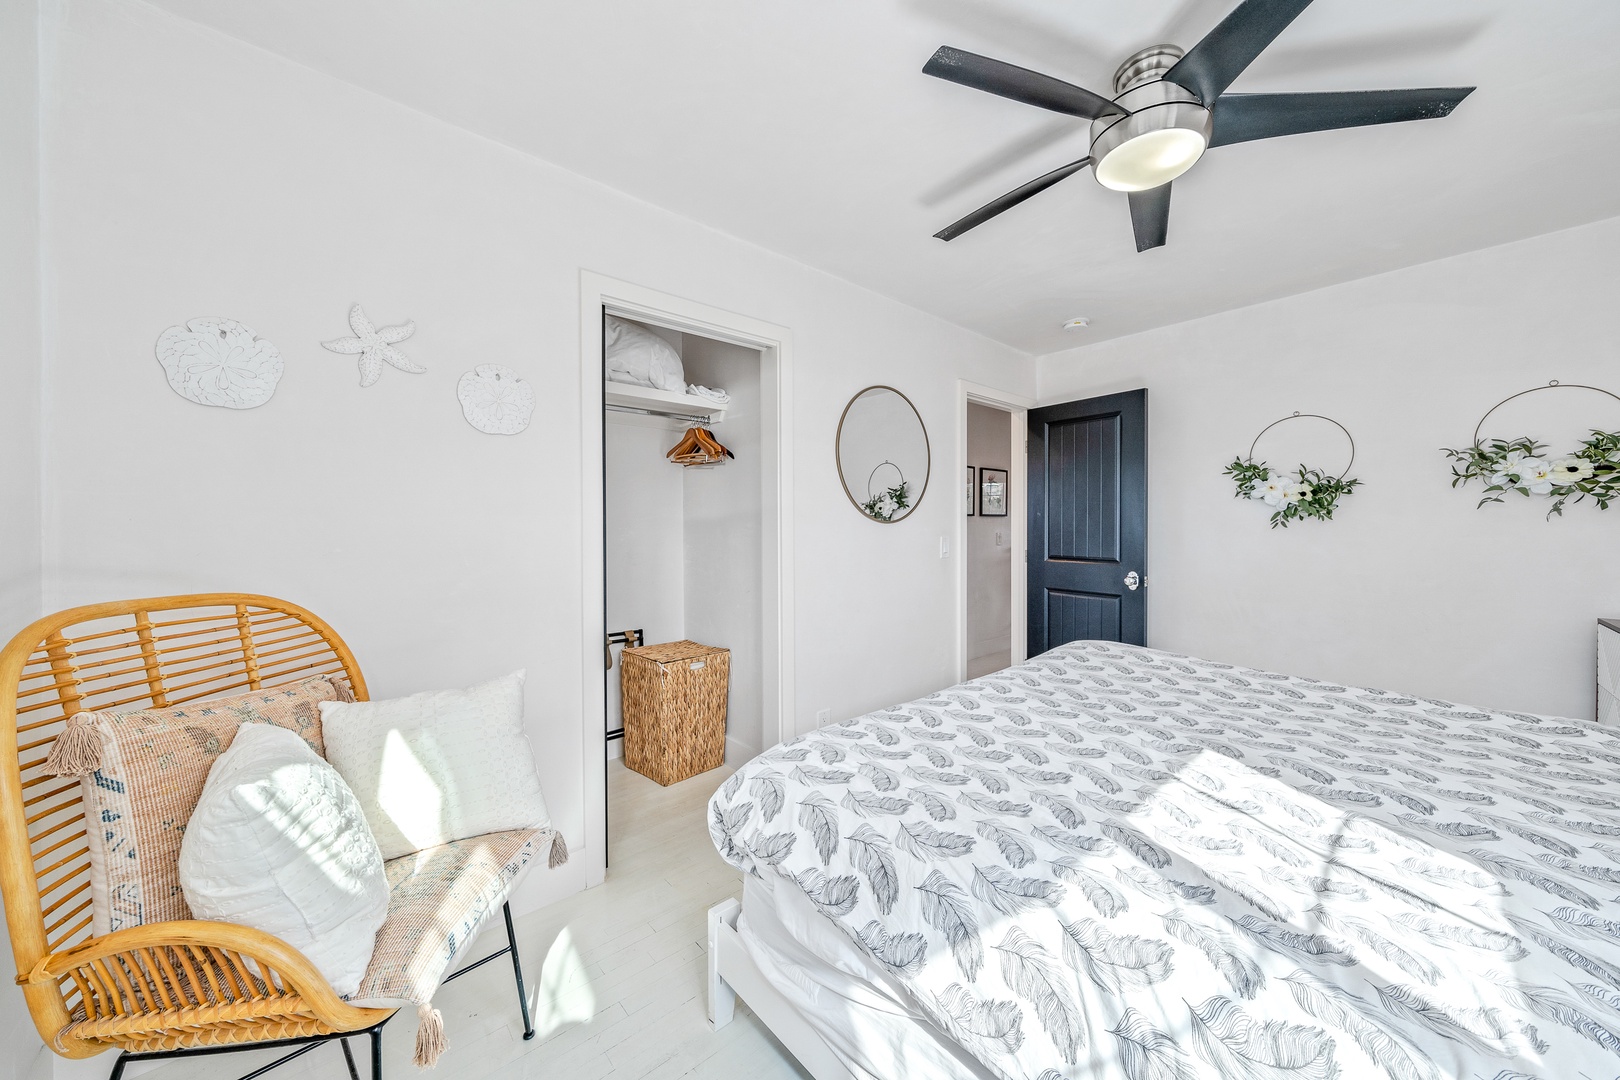 The second of two comfortable bedrooms offers a queen bed & ceiling fan